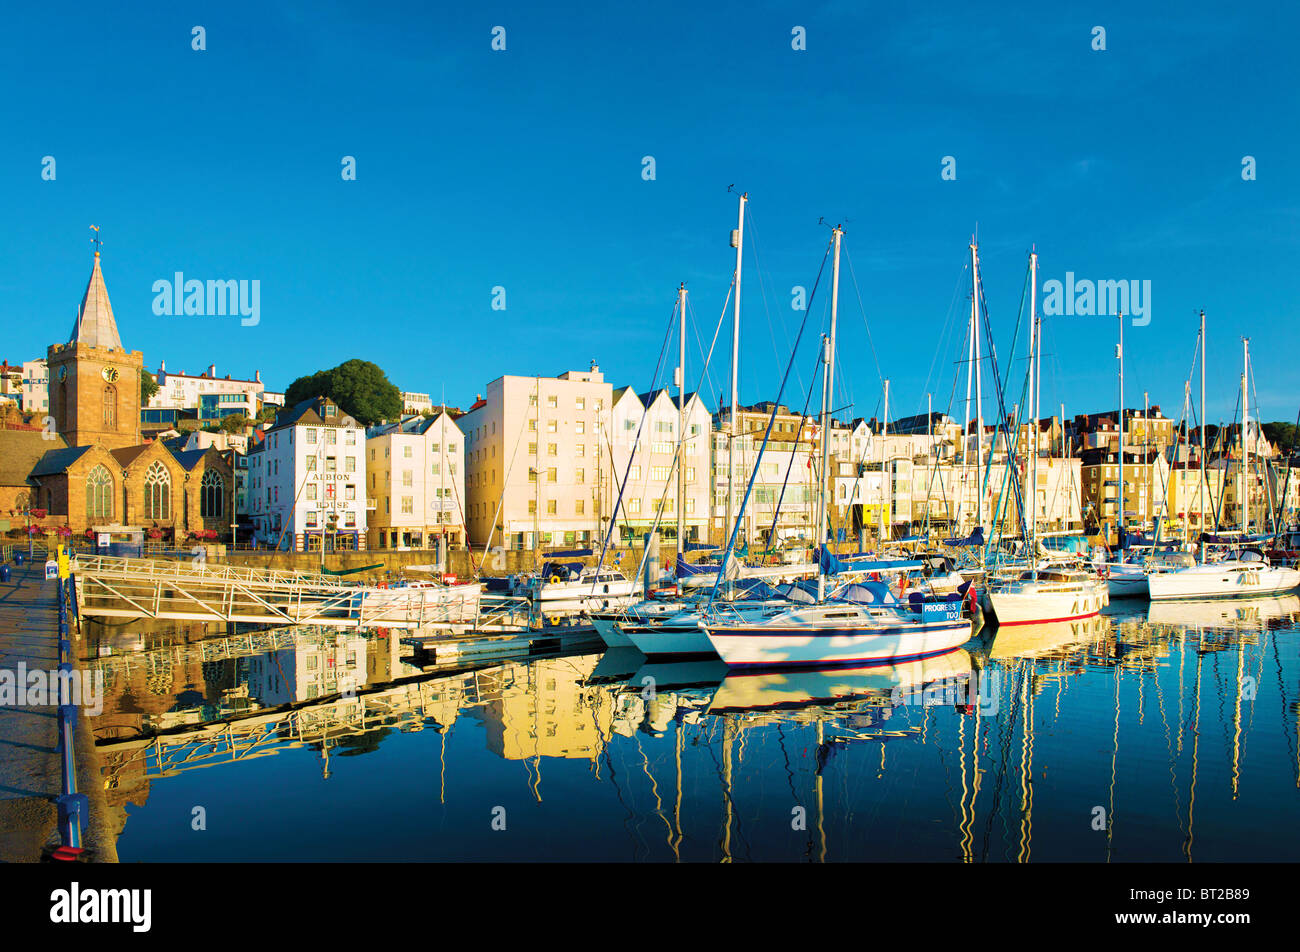 St Peter Port Guernsey,,Isole del Canale,porto, Foto Stock